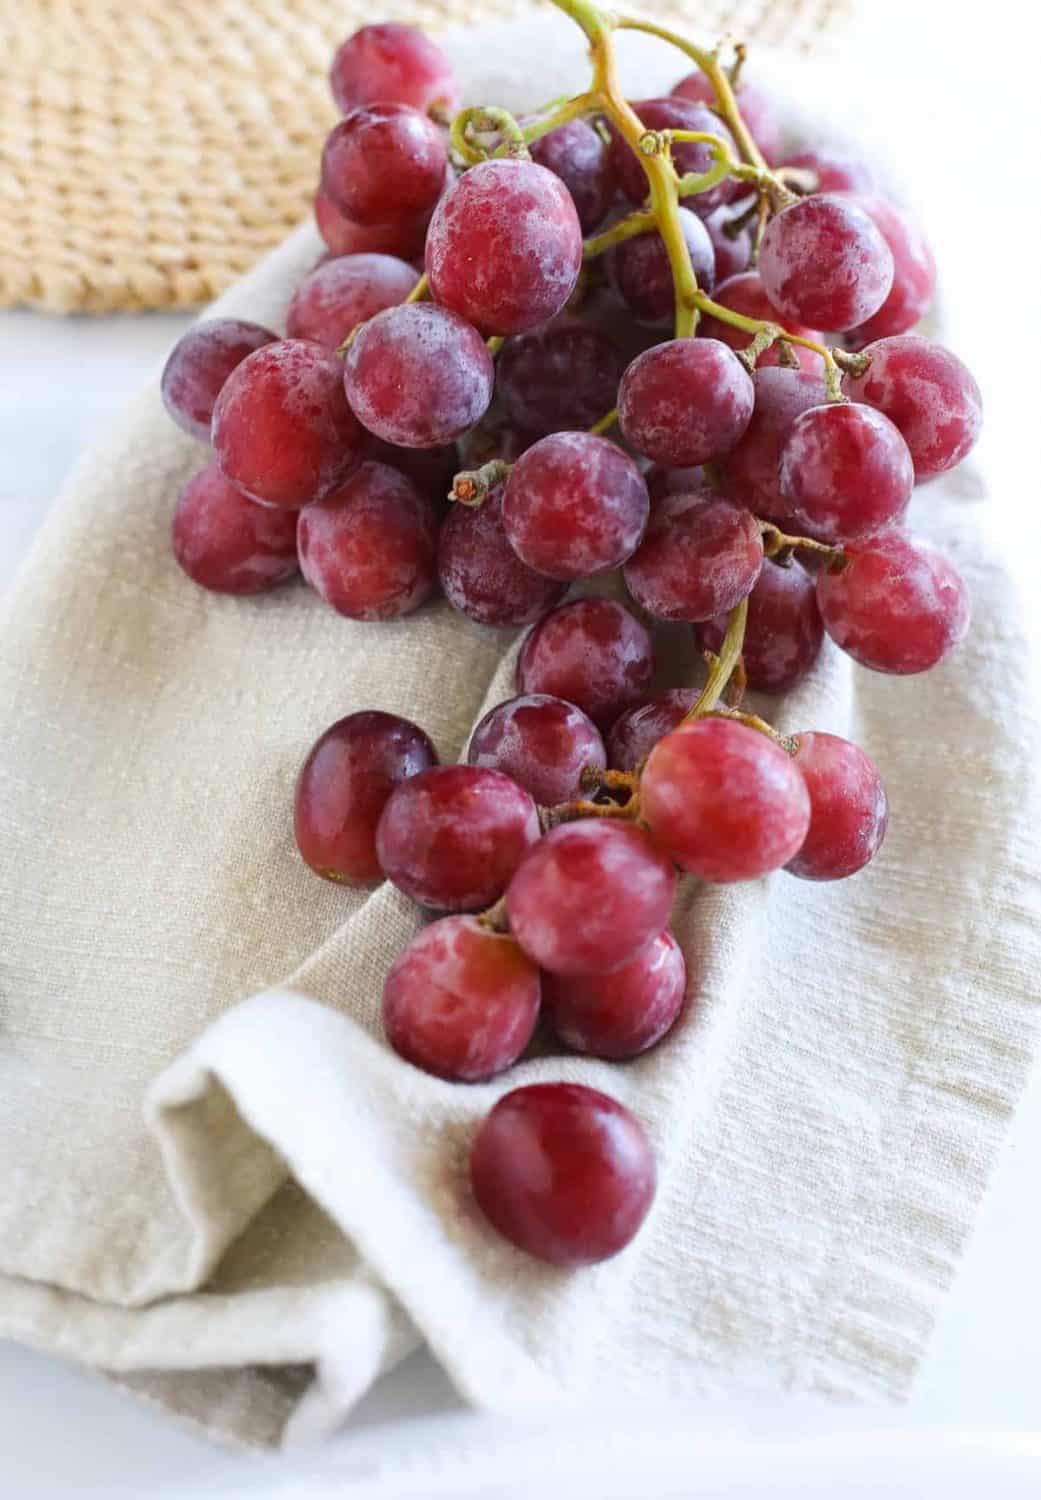 grapes from California